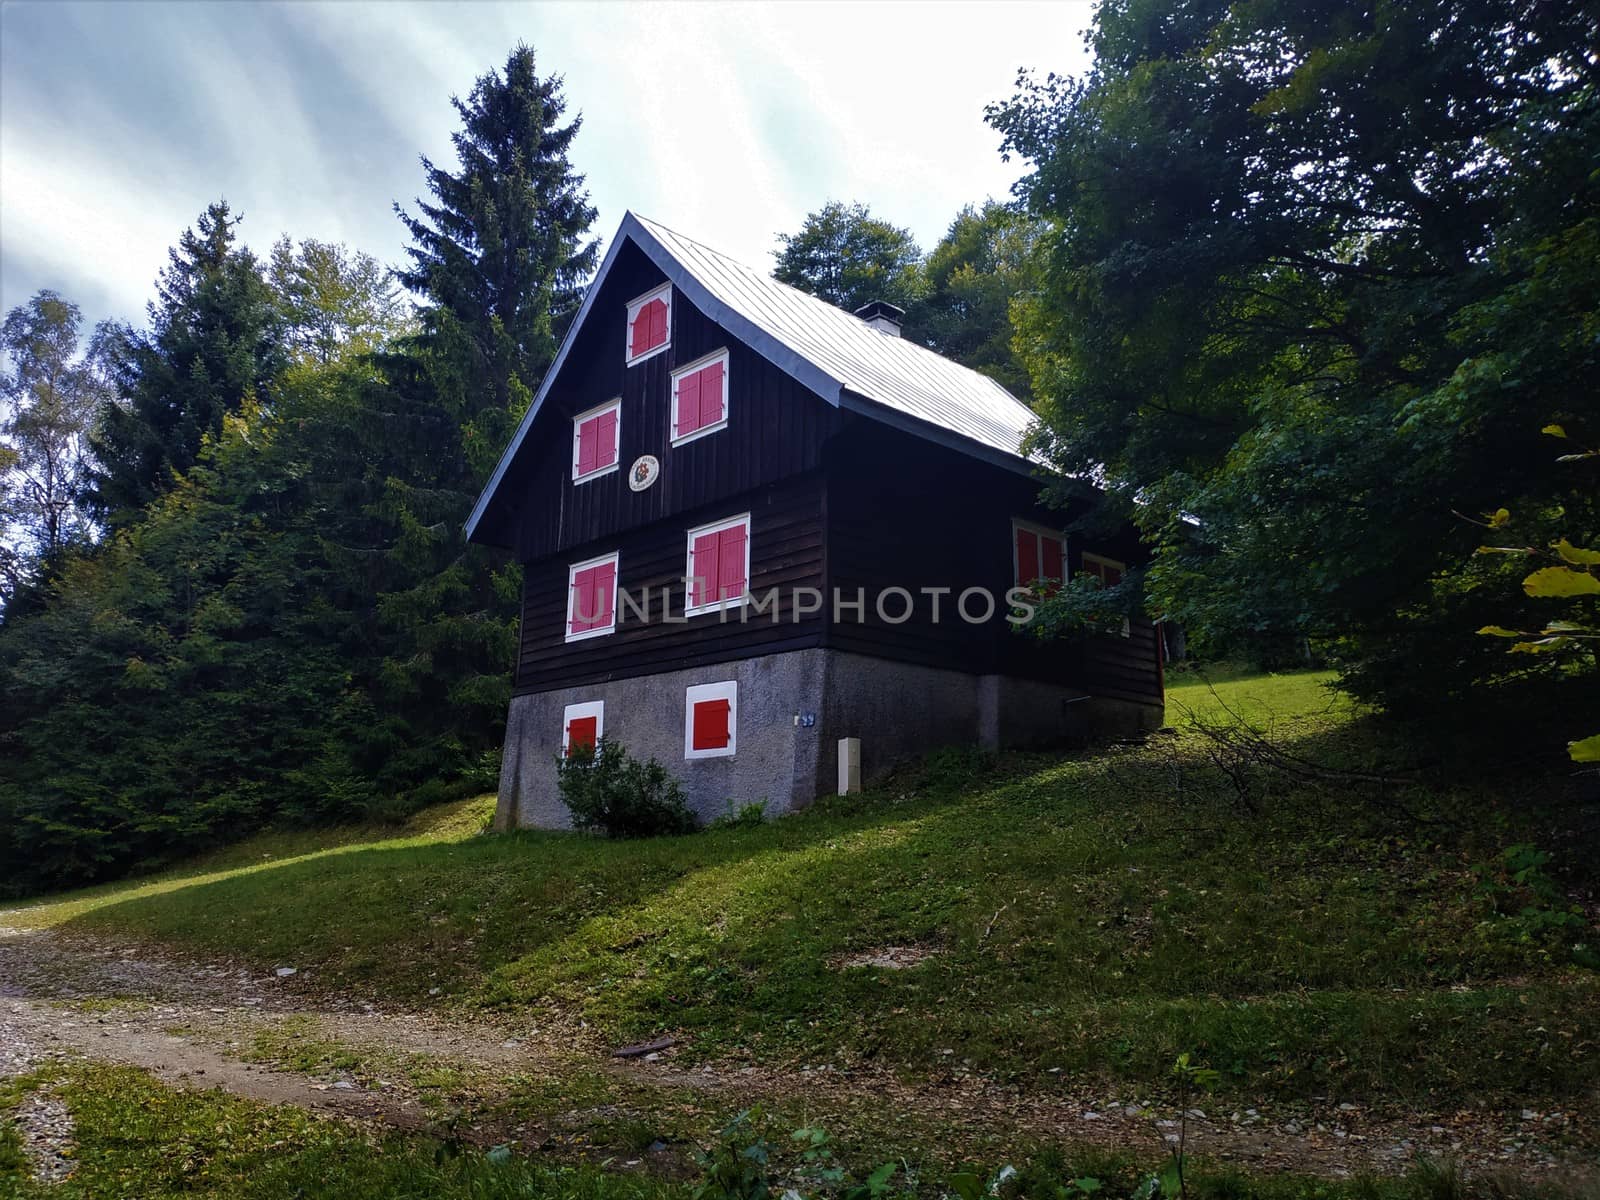 Wooden hut with red window blinds near Le Markstein mountain by pisces2386